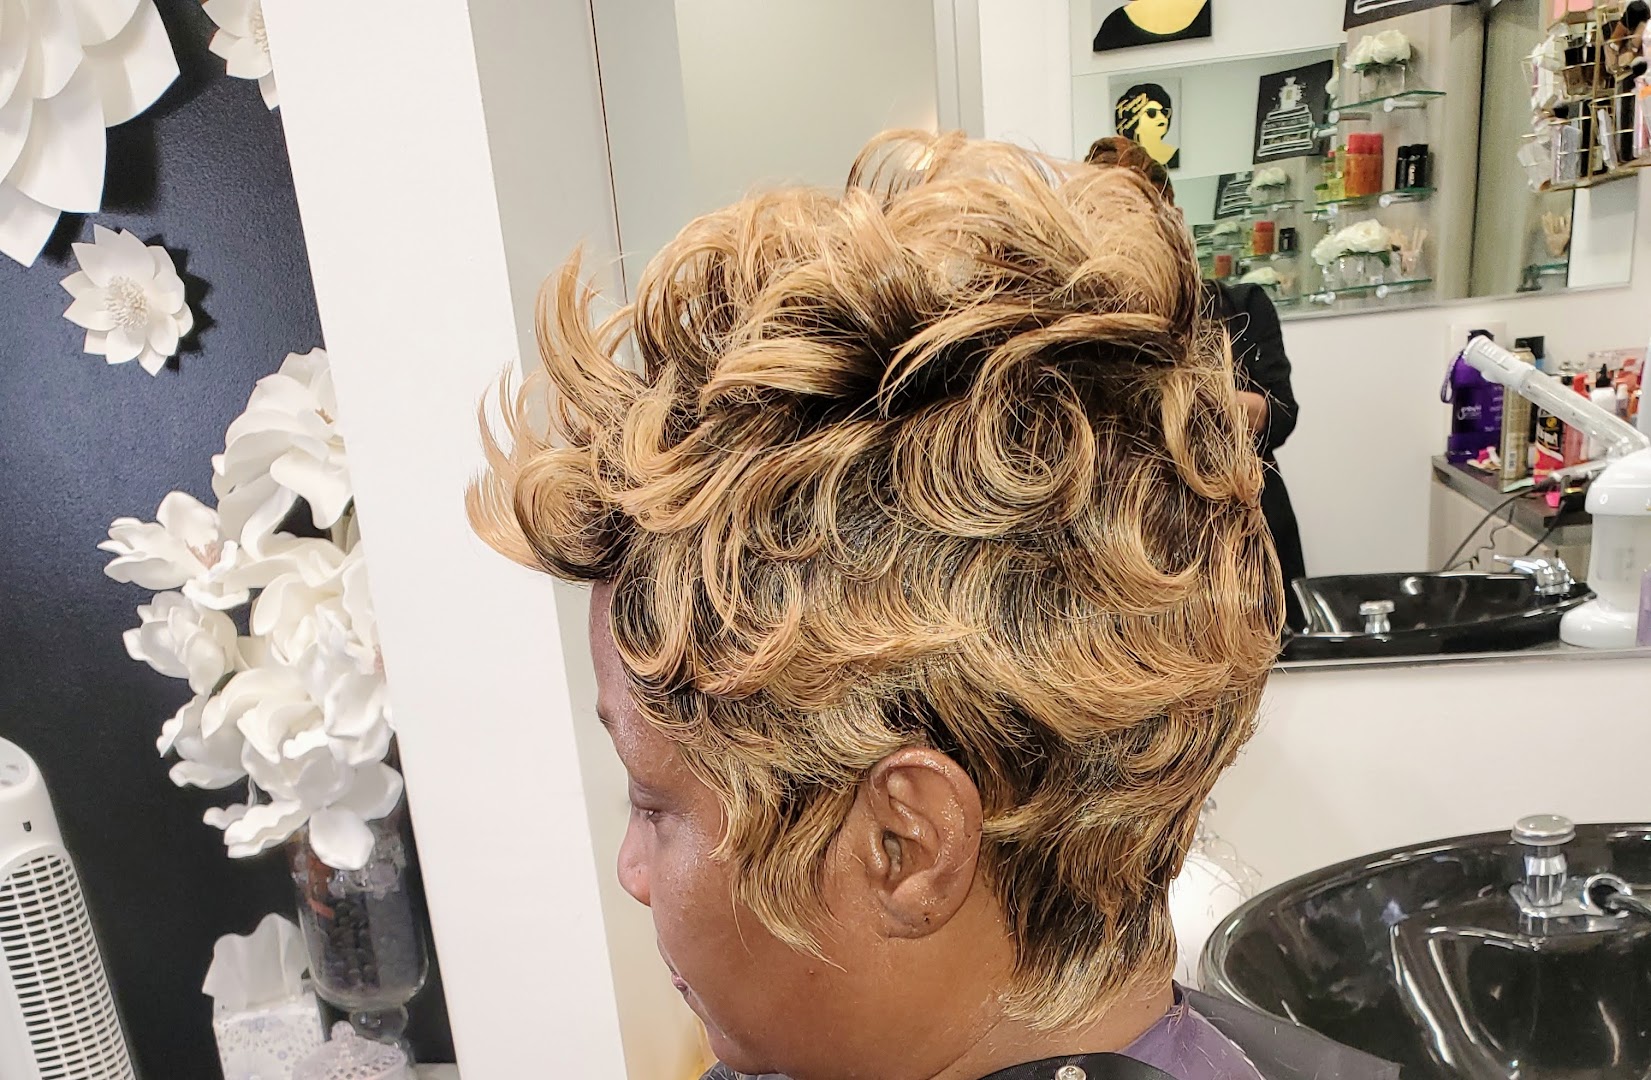 The Hair Cafe and Glam Studio LLC